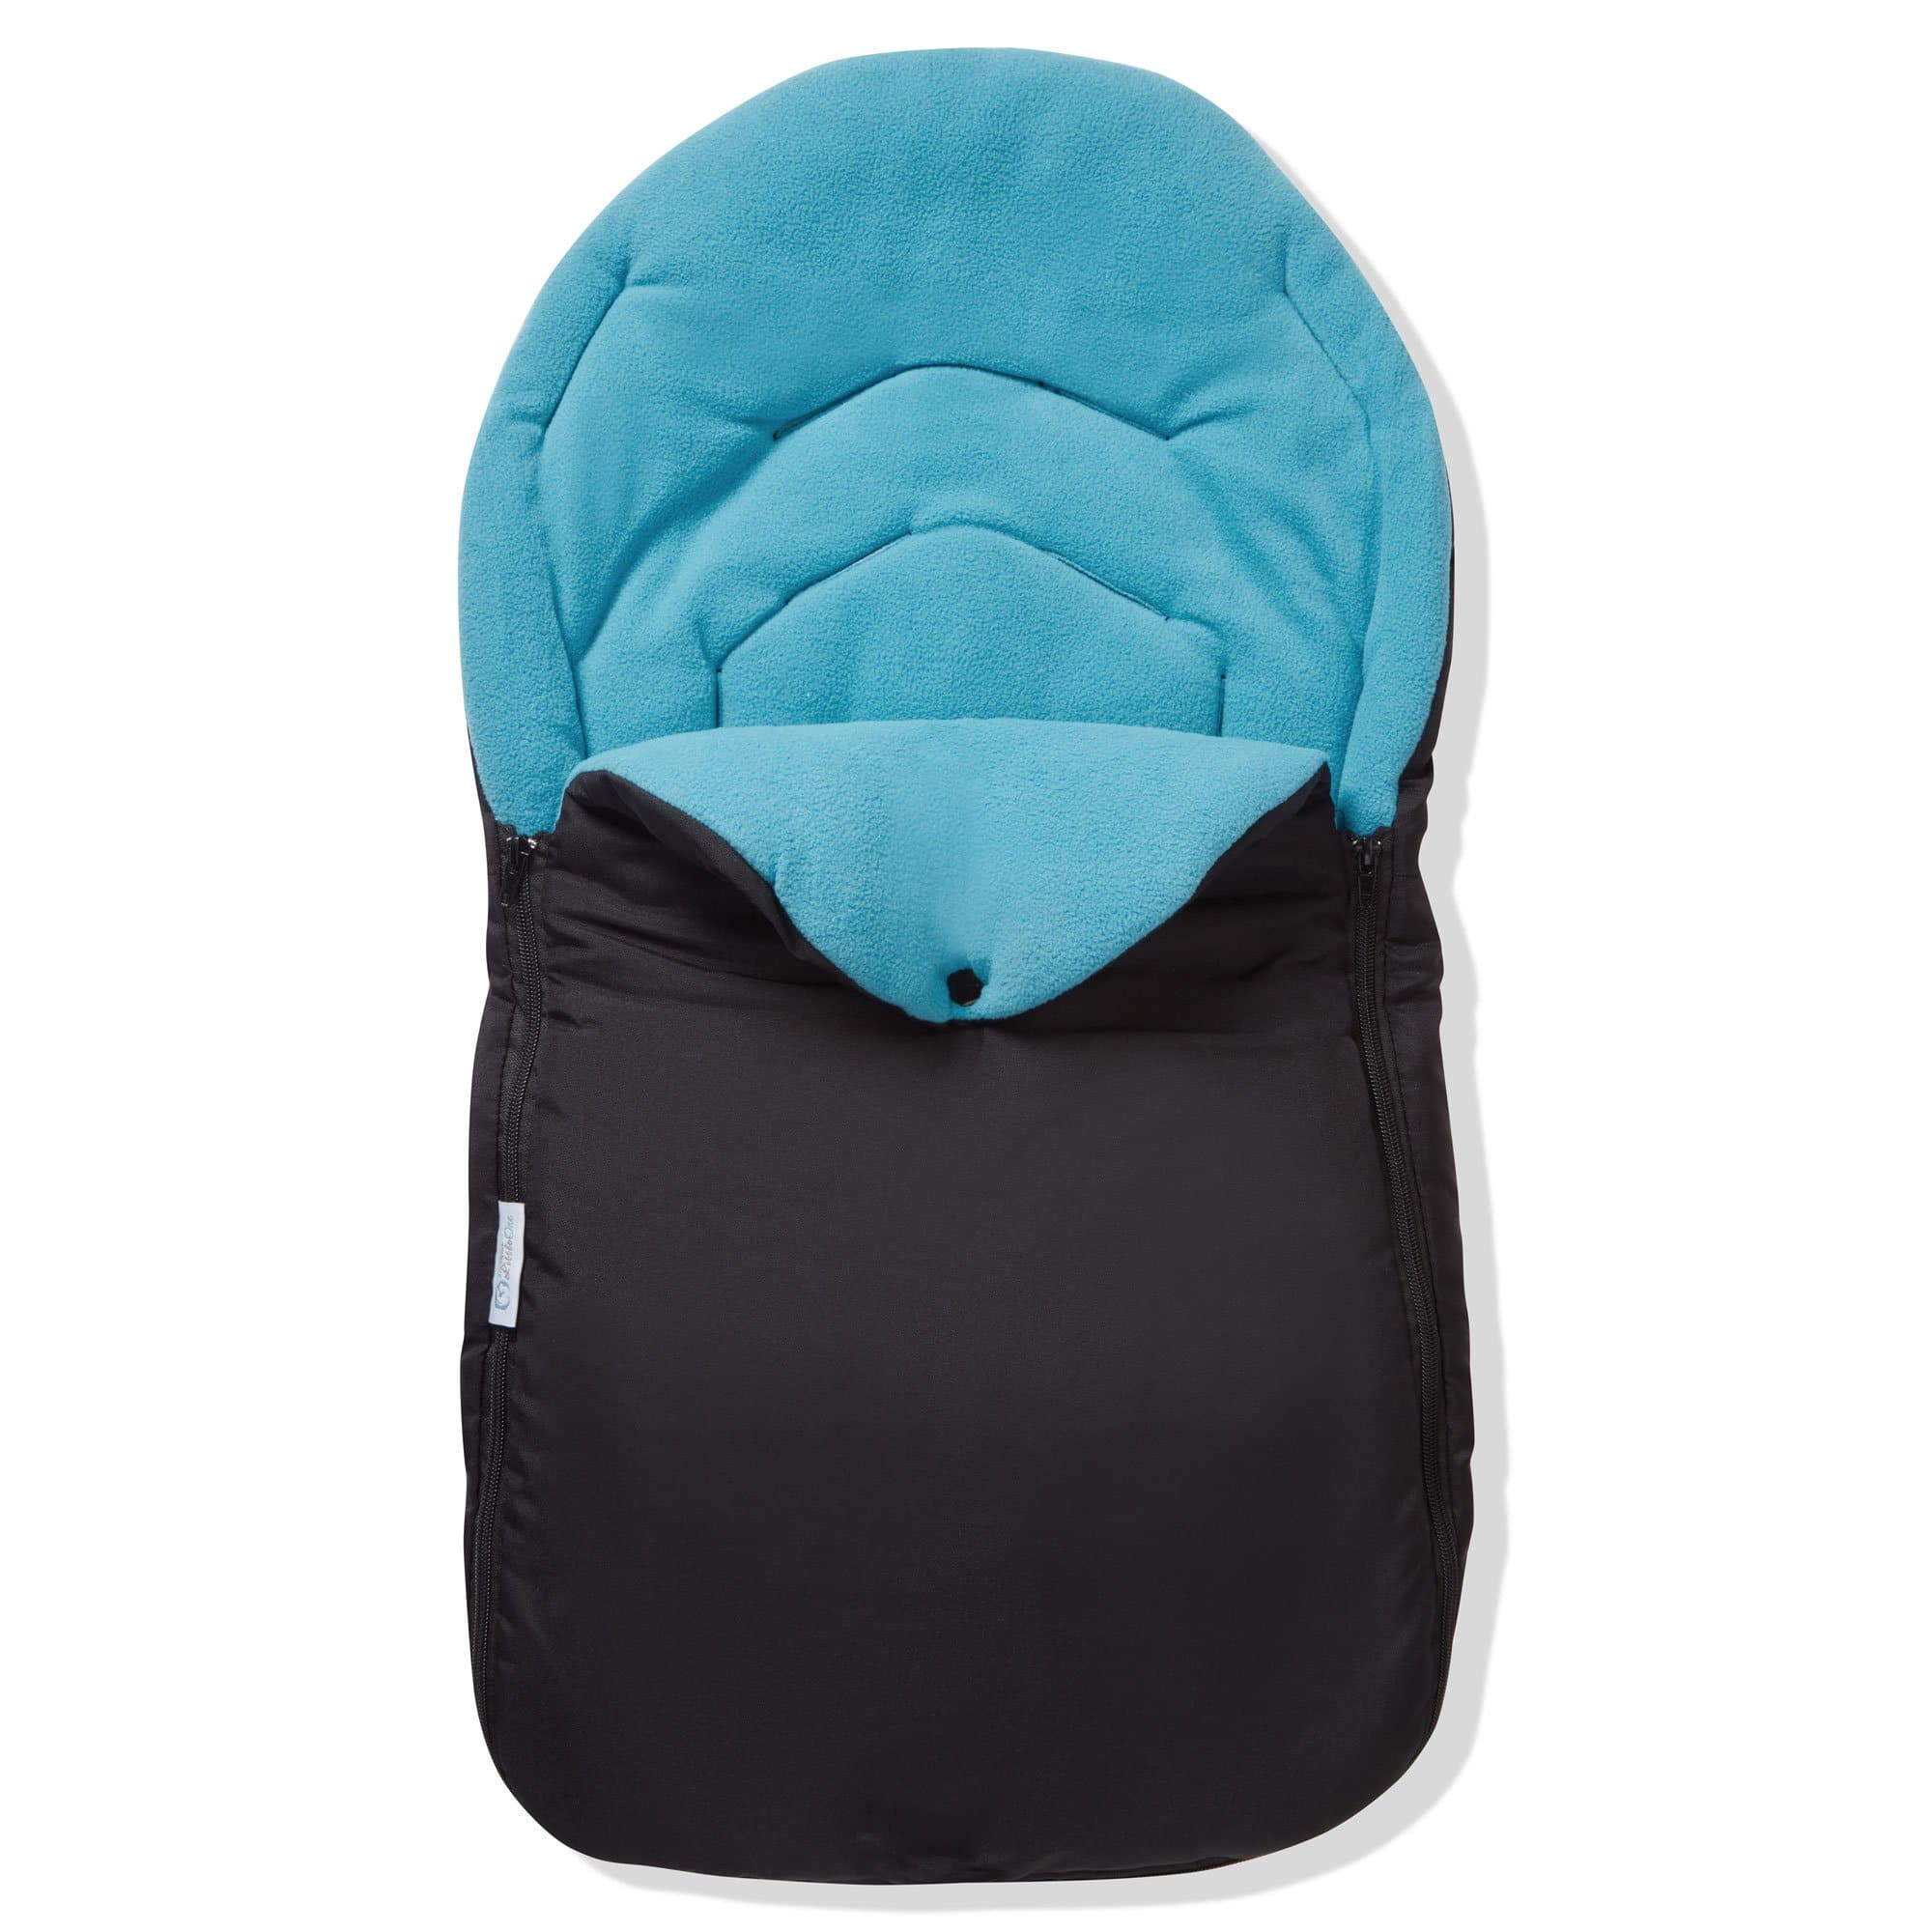 Universal Car Seat Footmuff / Cosy Toes - Fits All 3 And 5 Point Harnesses - For Your Little One